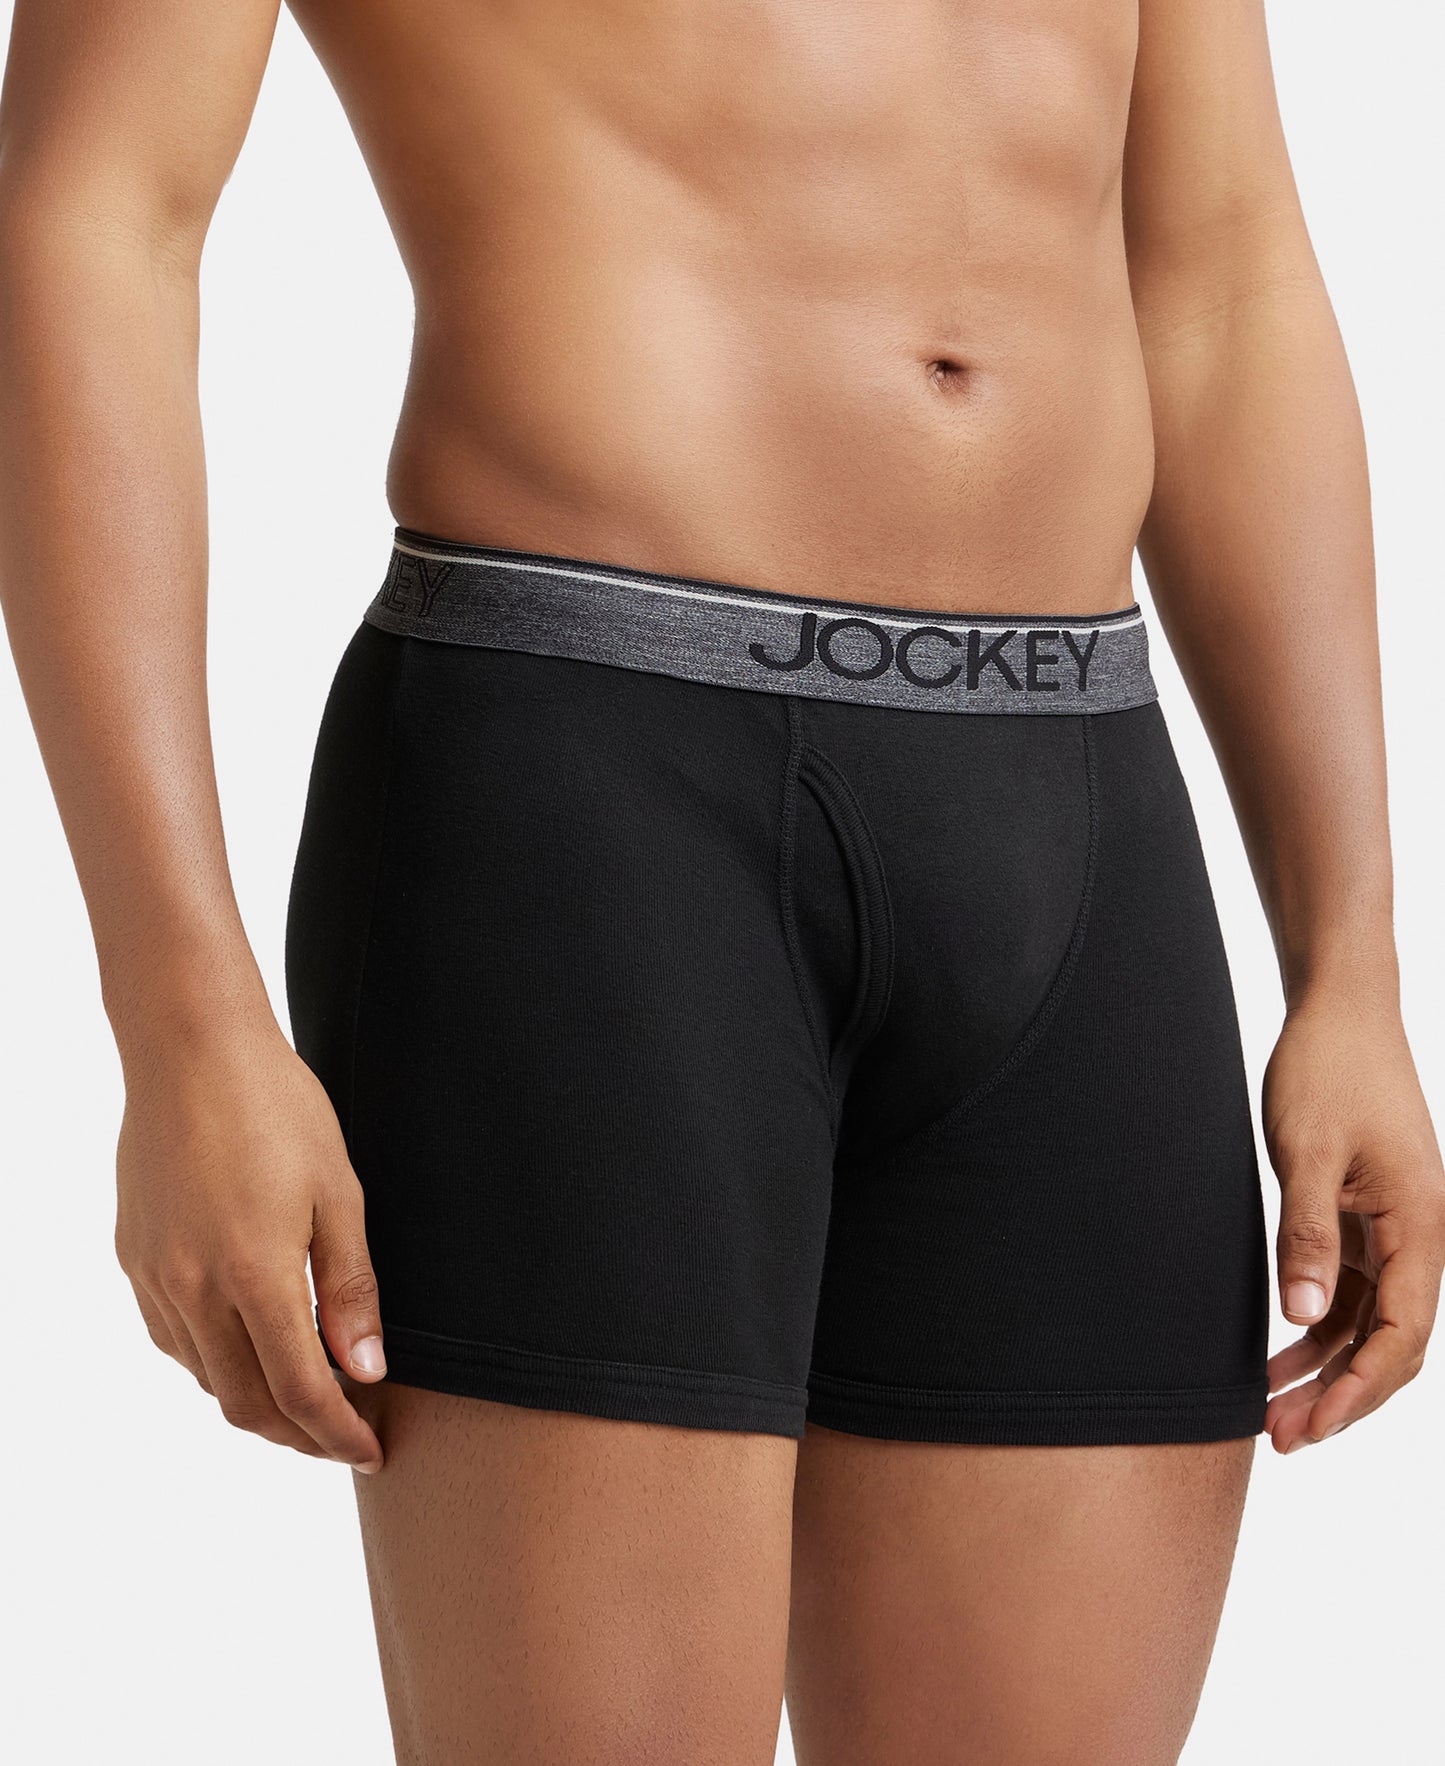 Super Combed Cotton Rib Solid Boxer Brief with Ultrasoft and Durable Waistband - Black/Grey Melange/Brown (Pack of 3)